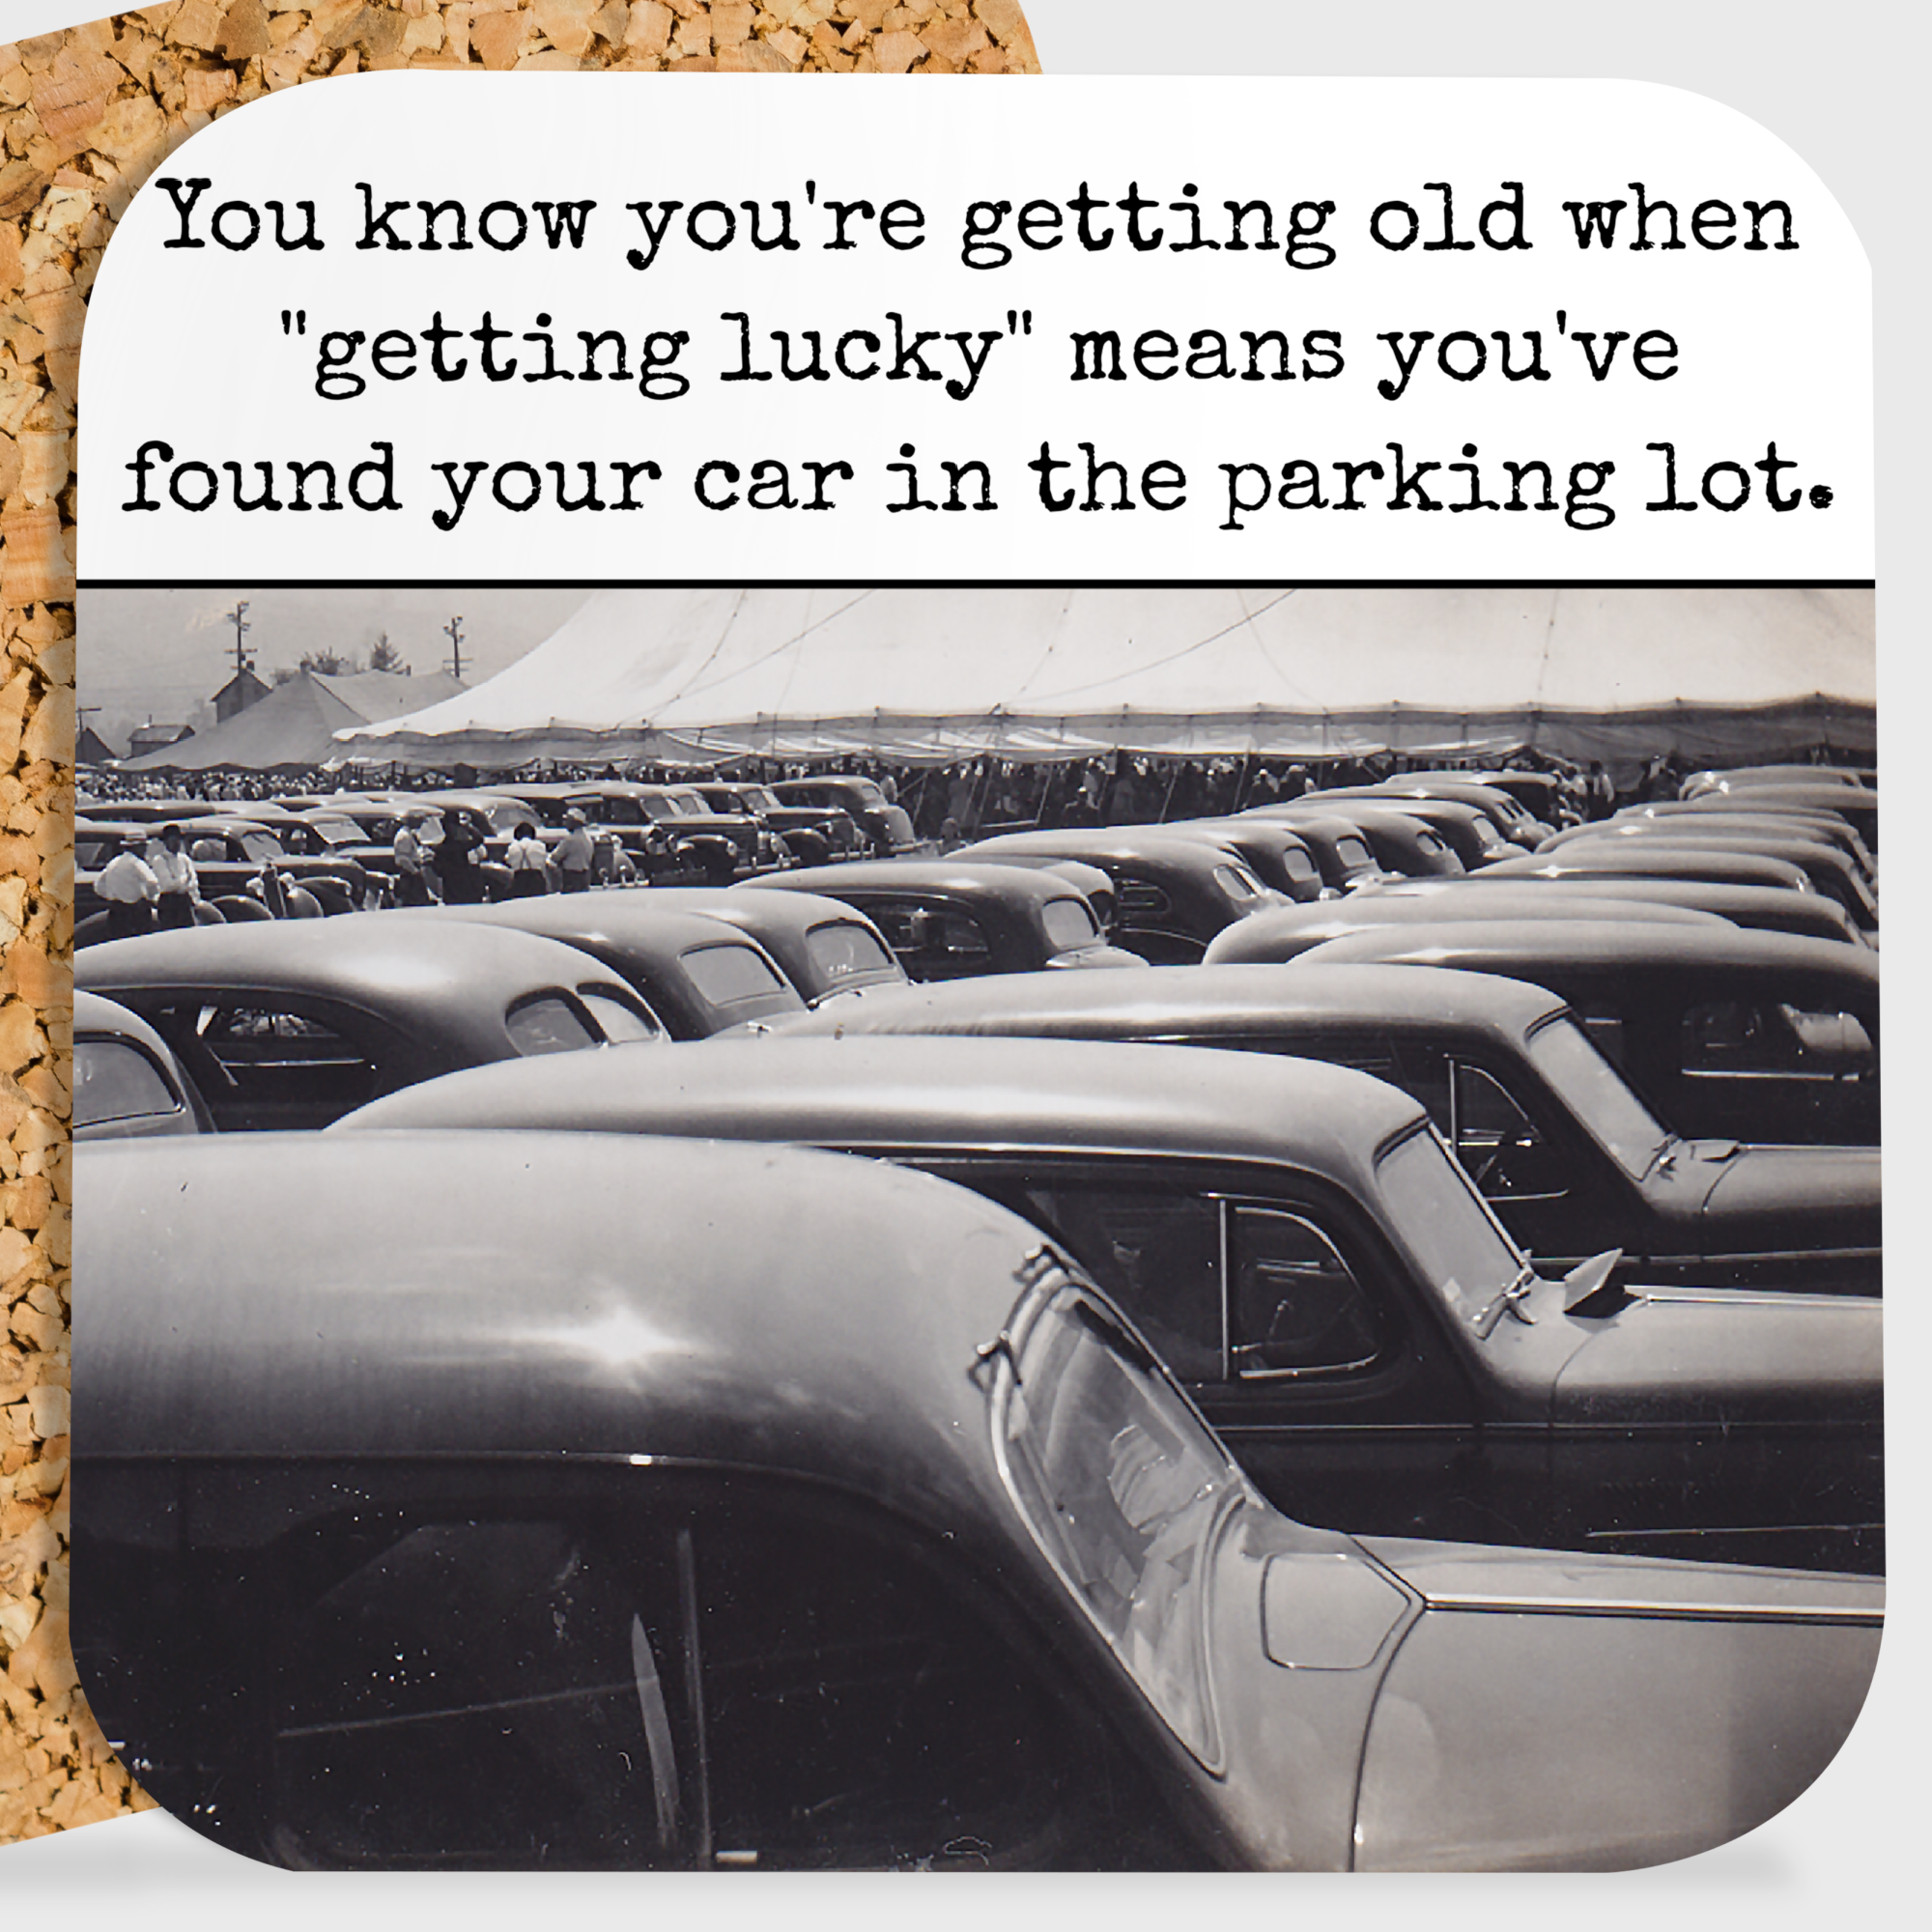 COASTER. "Getting Lucky" Means You've Found Your Car...